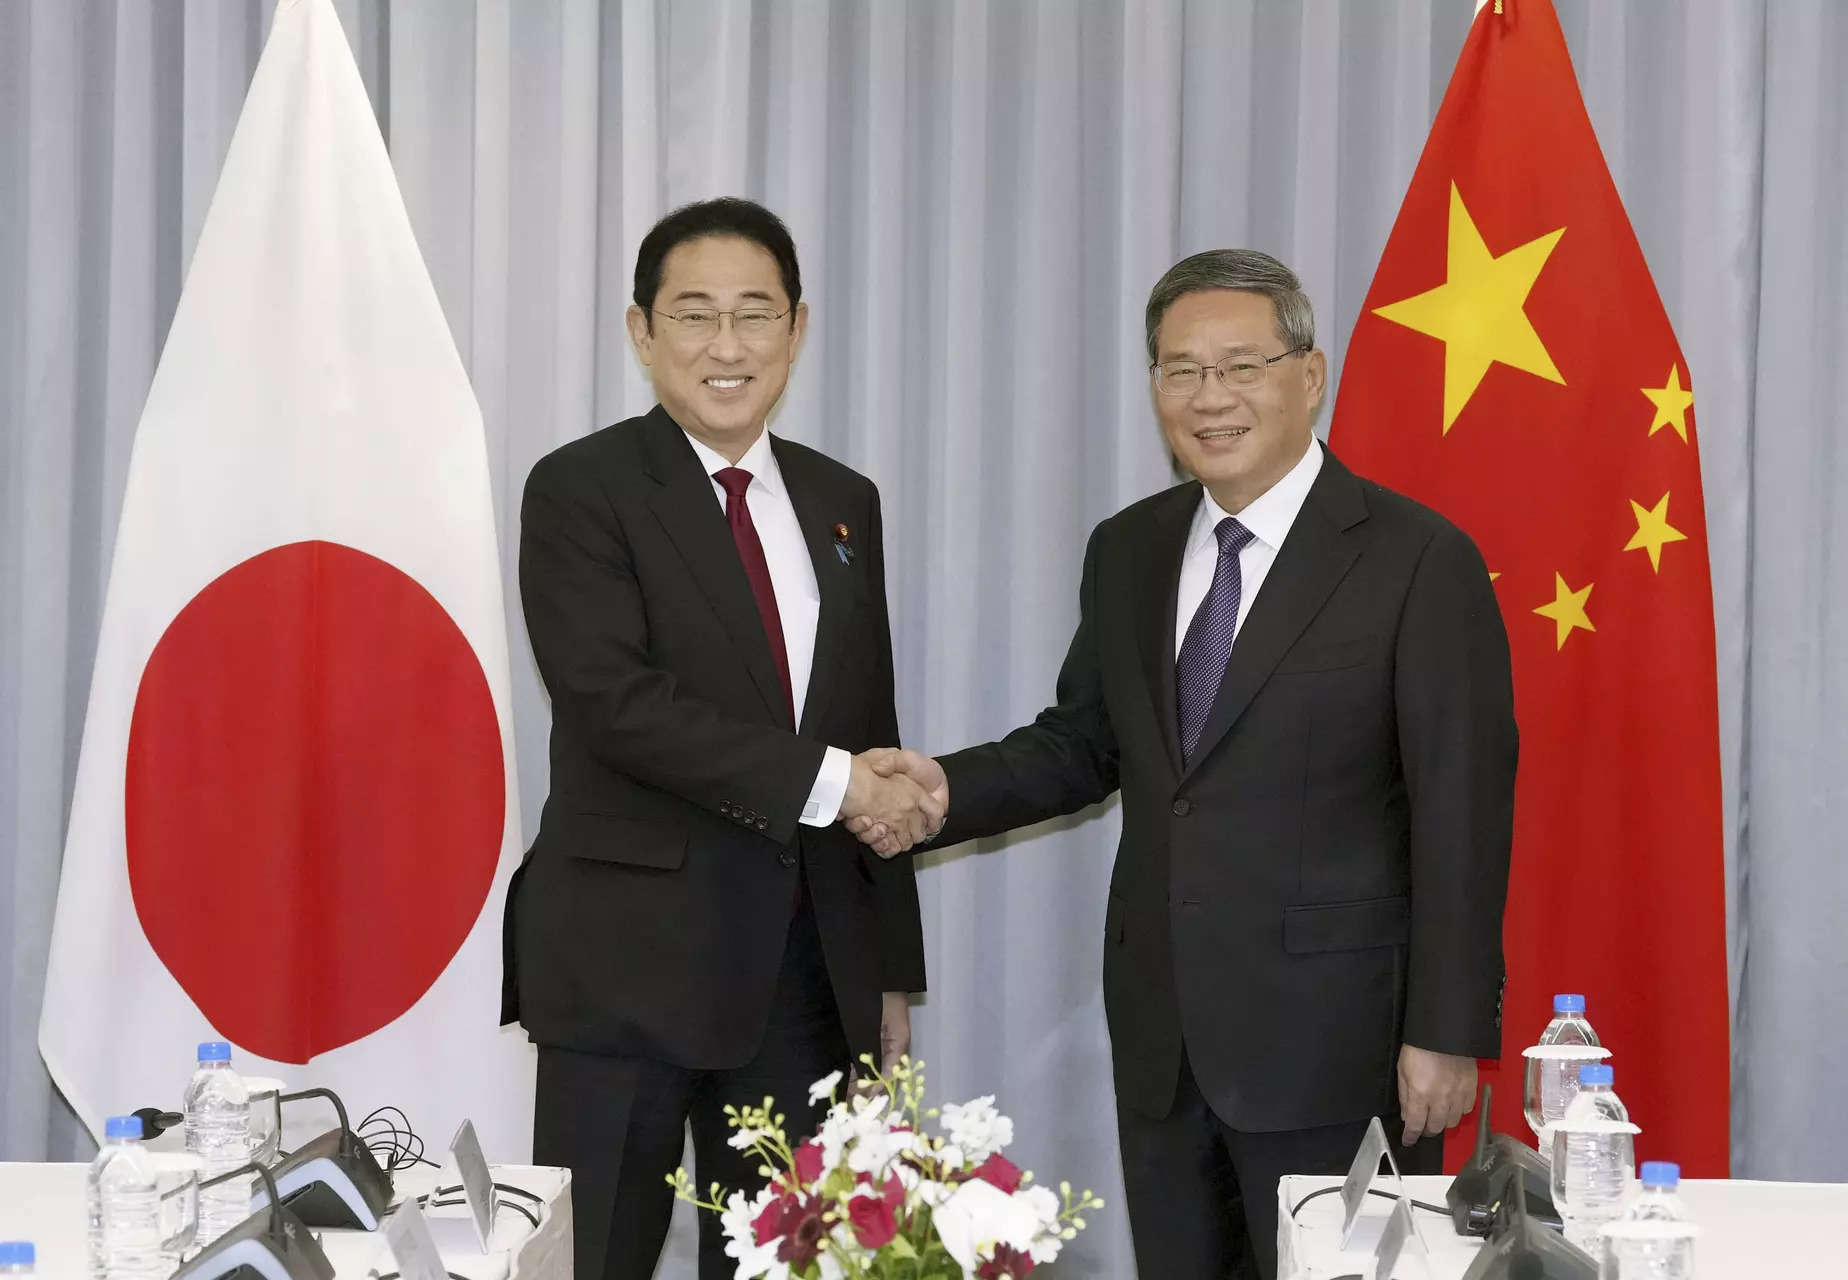 Chinese and Japanese leaders in South Korea for their first trilateral meeting since 2019 